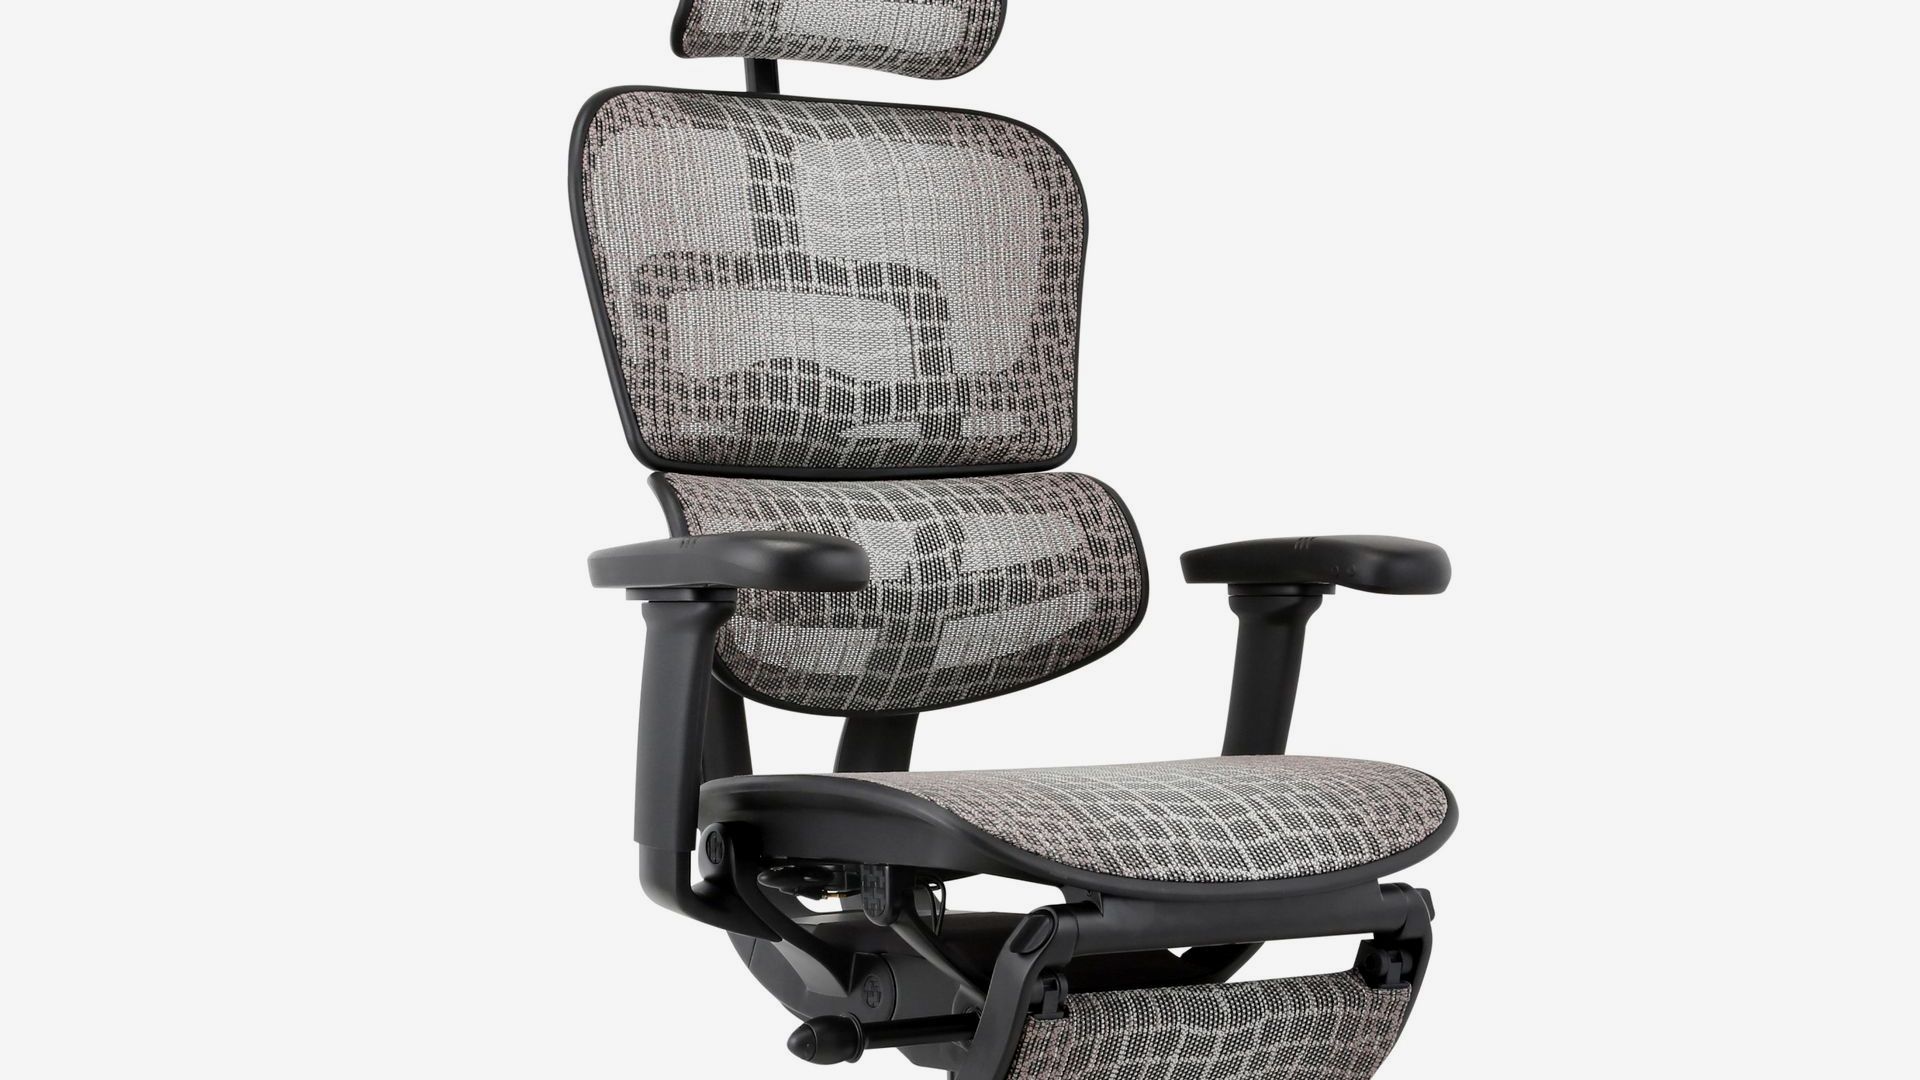 Ergohuman Carbon gaming chair with a black frame and grey snakeskin patterrned mesh upholstery